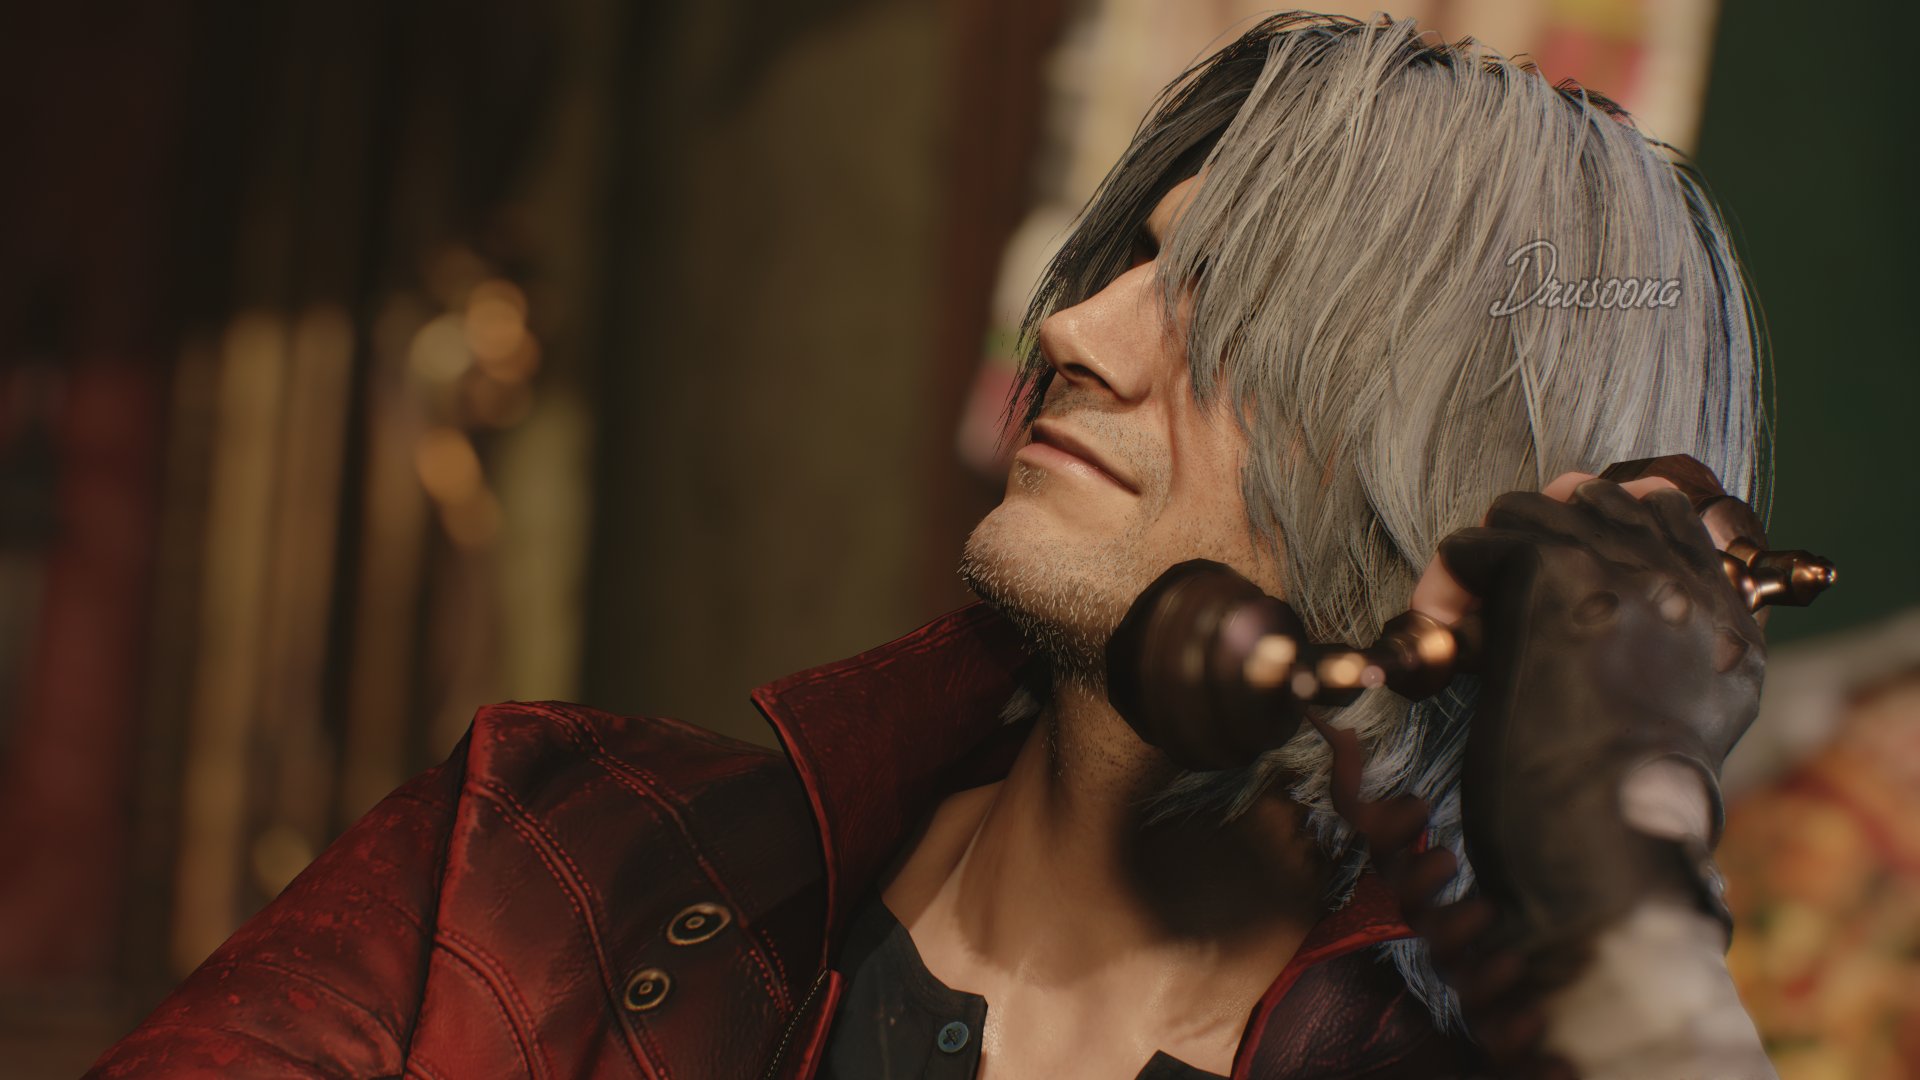 Dante looks great in this hairstyle (by drusoona) : r/DevilMayCry